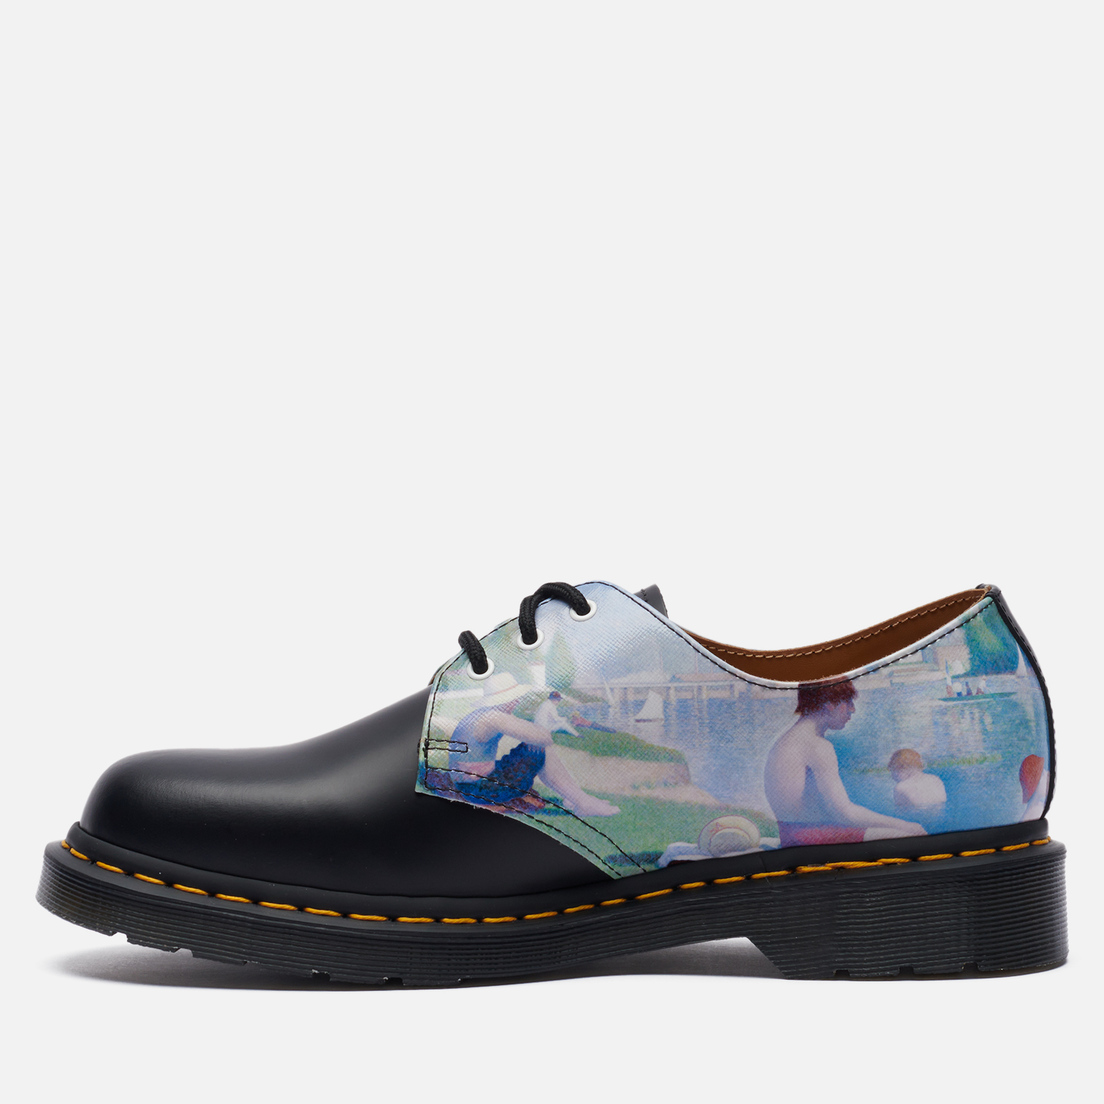 Dr. Martens Ботинки x The National Gallery 1461 Bathers